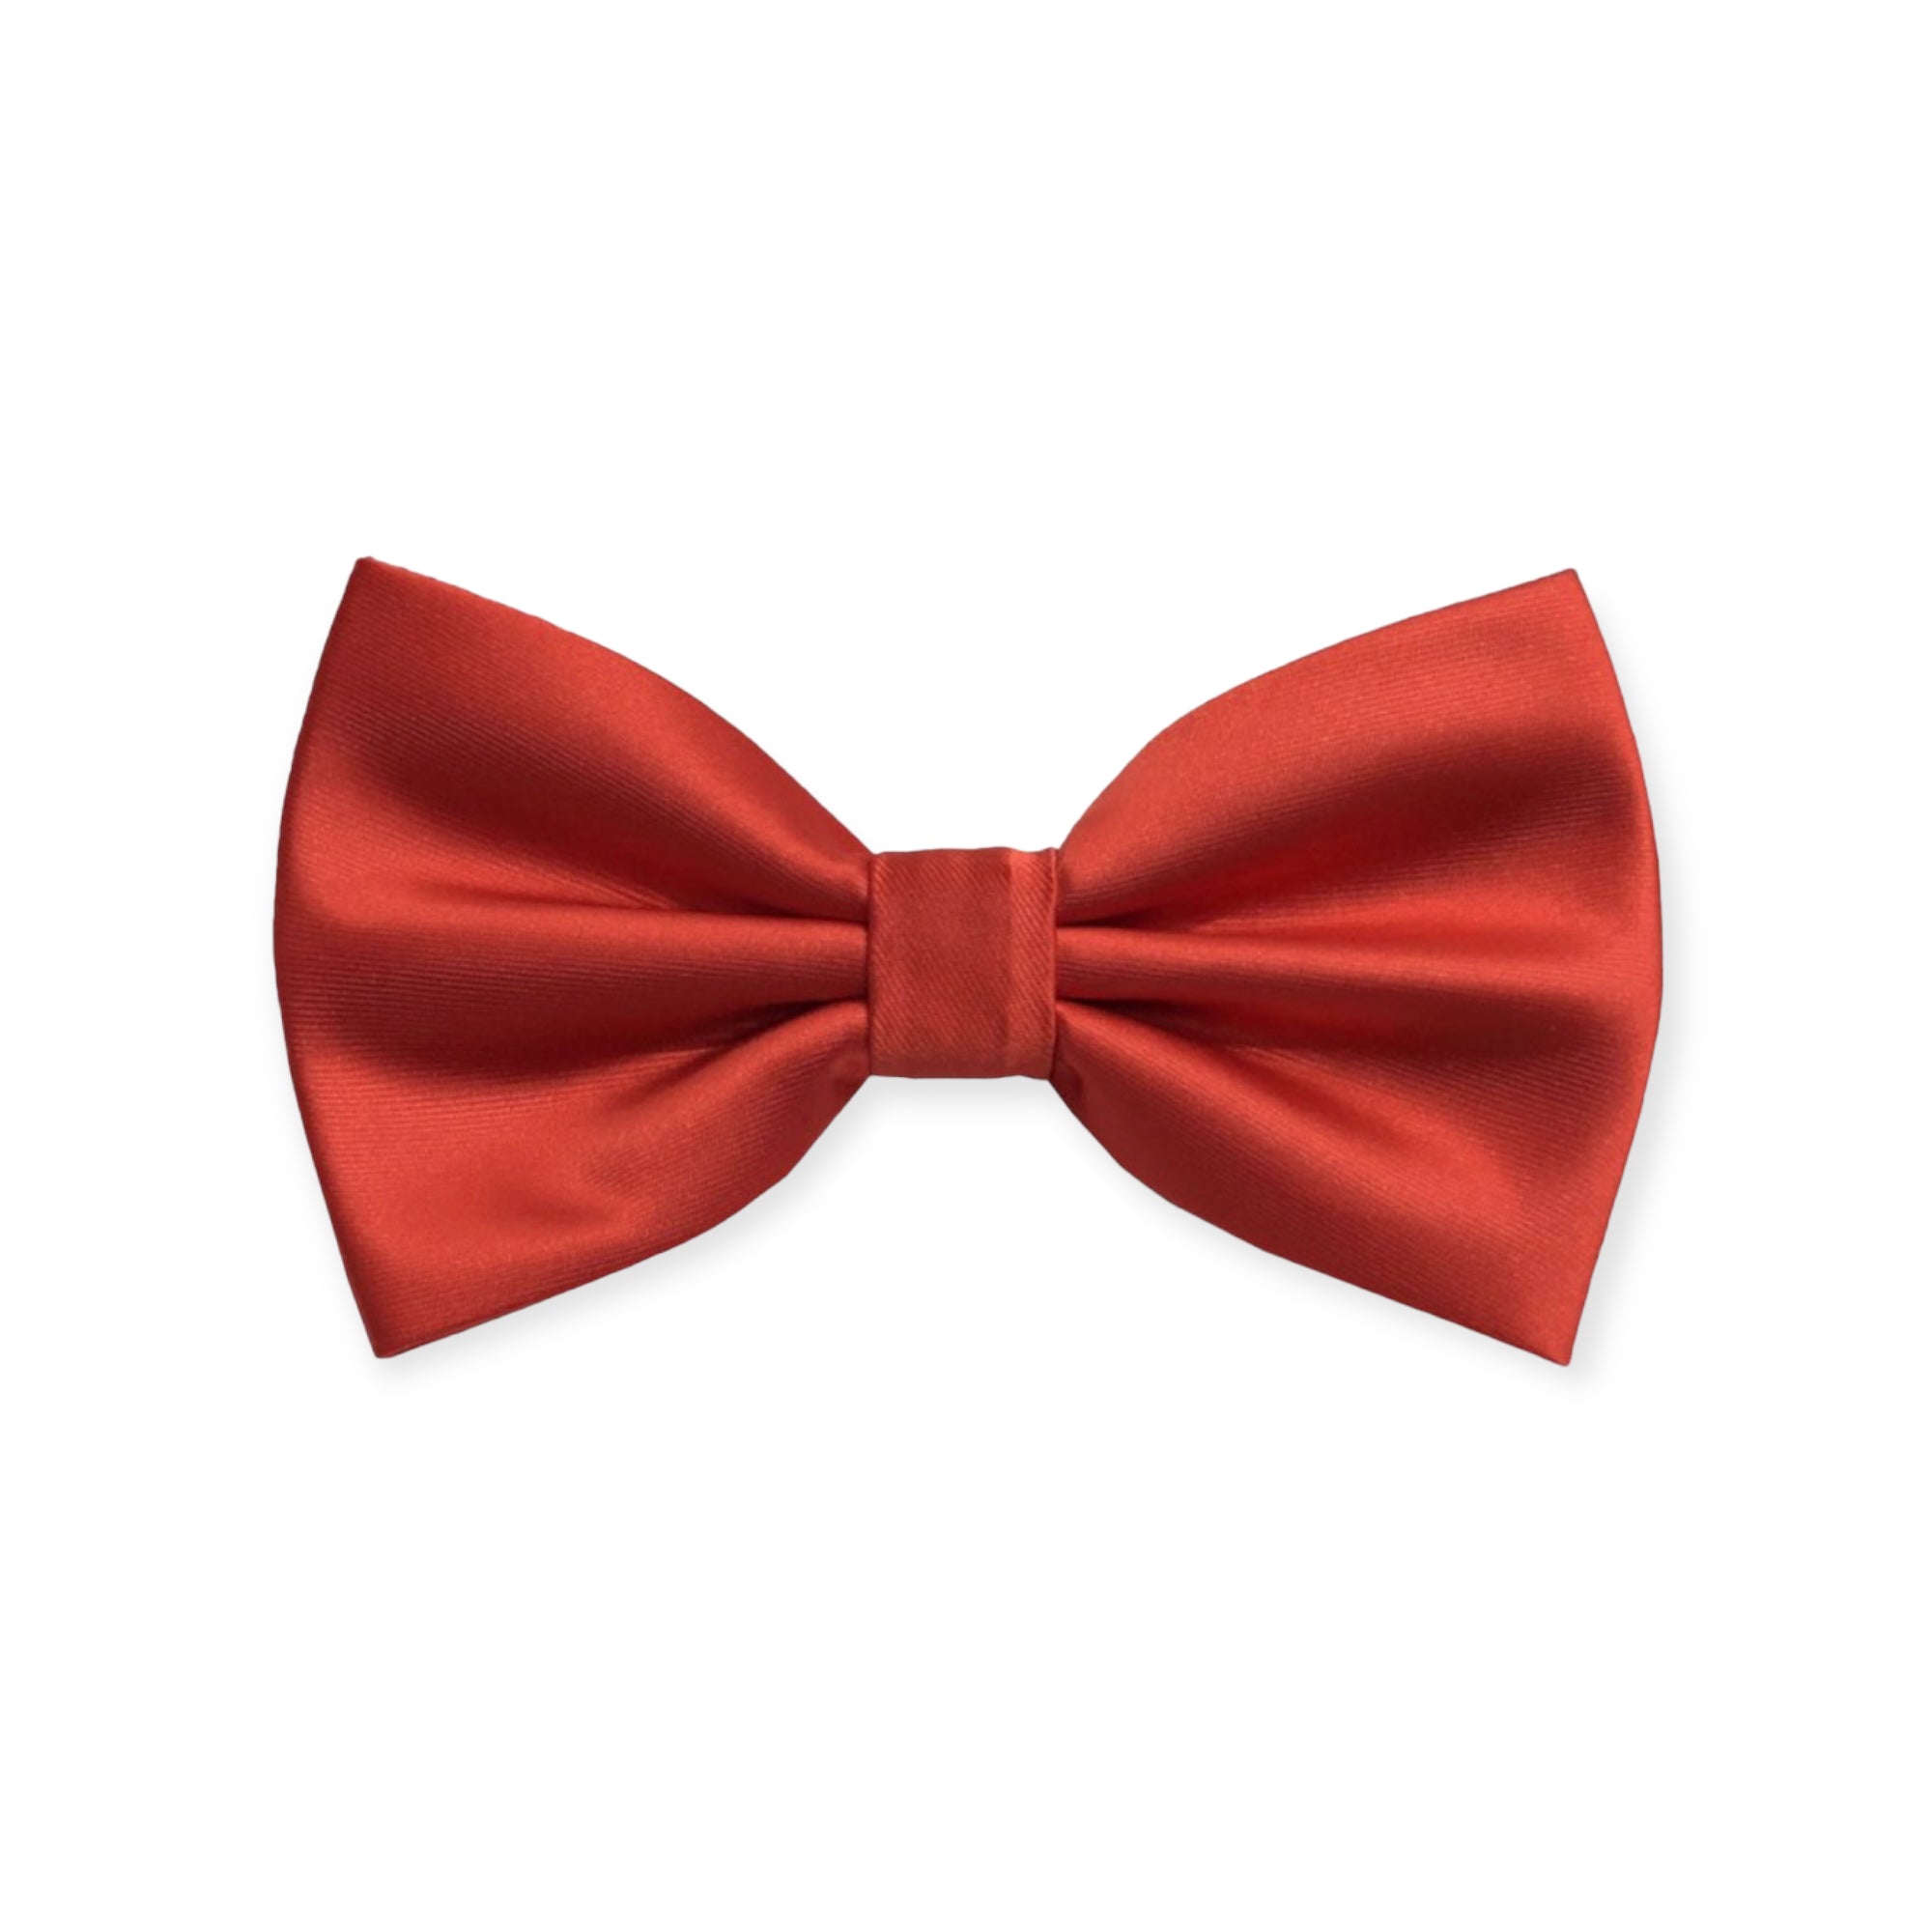 Solid Red Bow Tie and Hanky